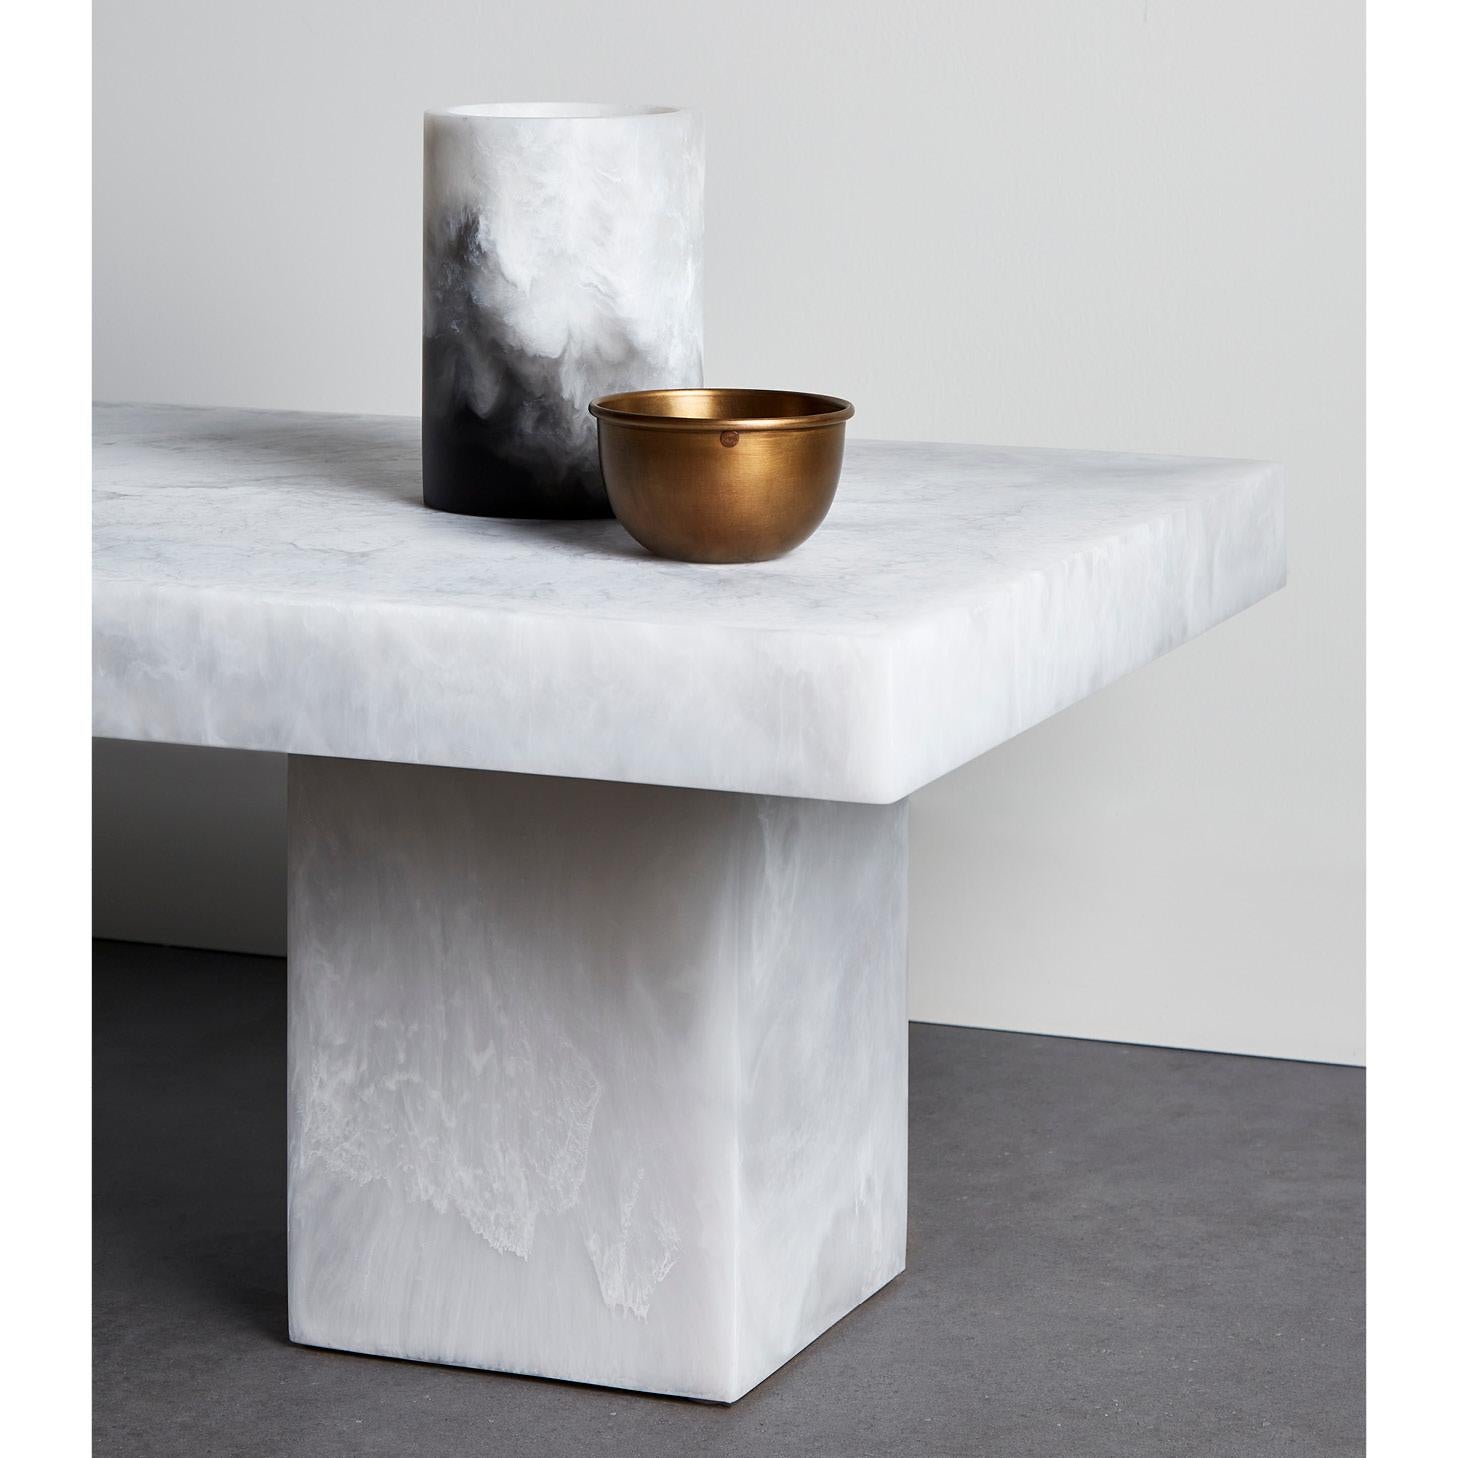 Hand-Crafted Studio Sturdy Lions Coffee Table – White Marble Resin For Sale